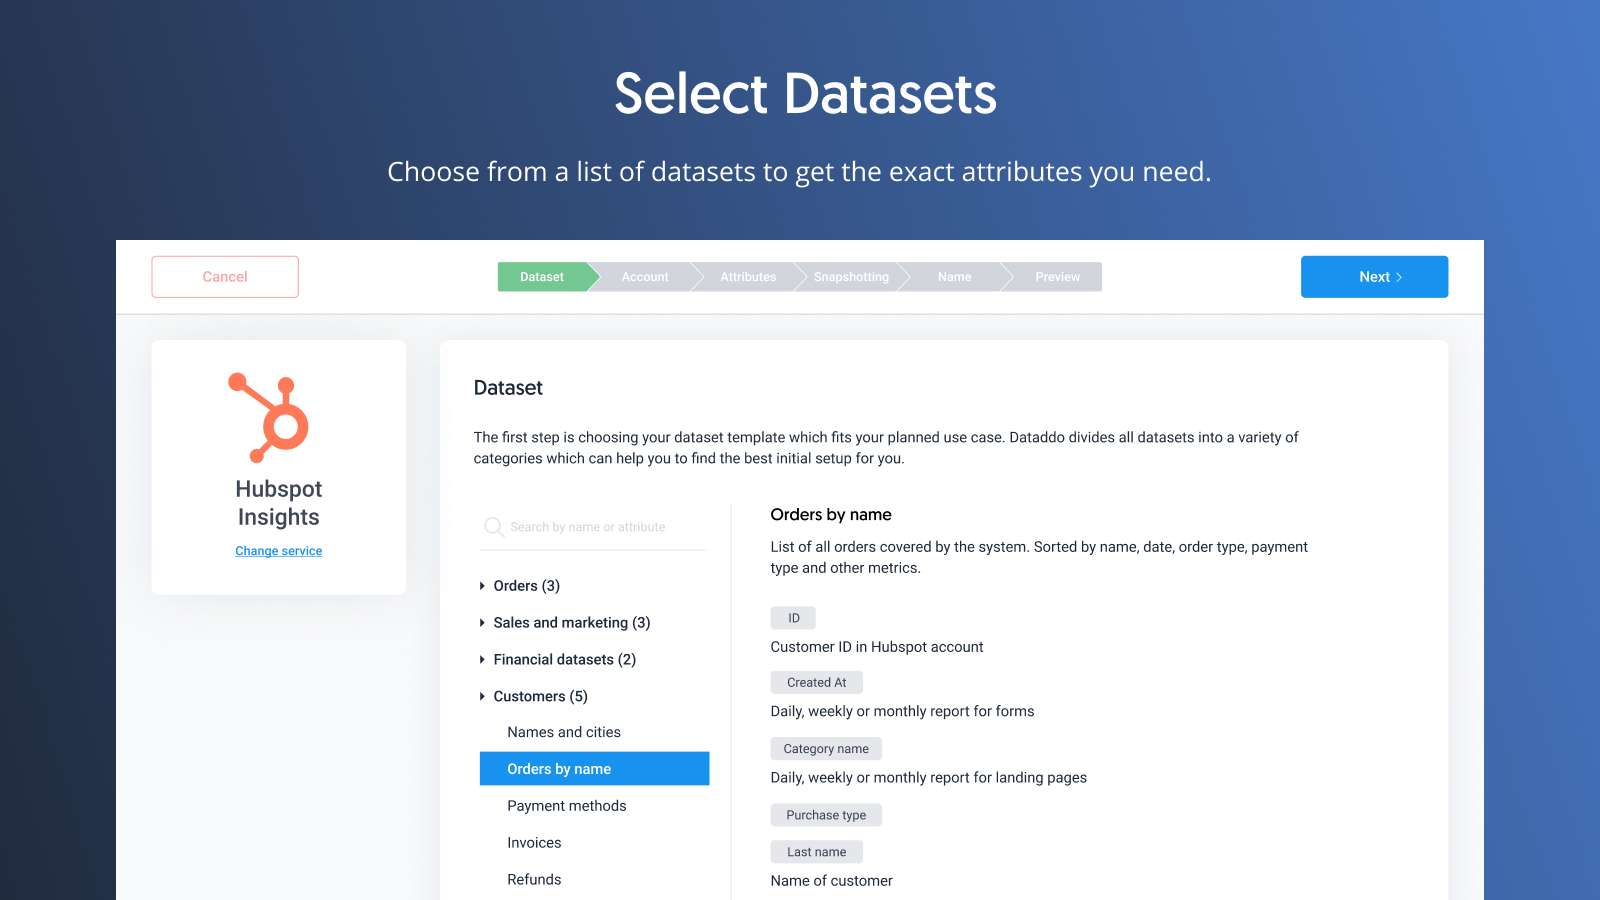 Choose from a list of datasets to get the exact metrics and dimensions you need.